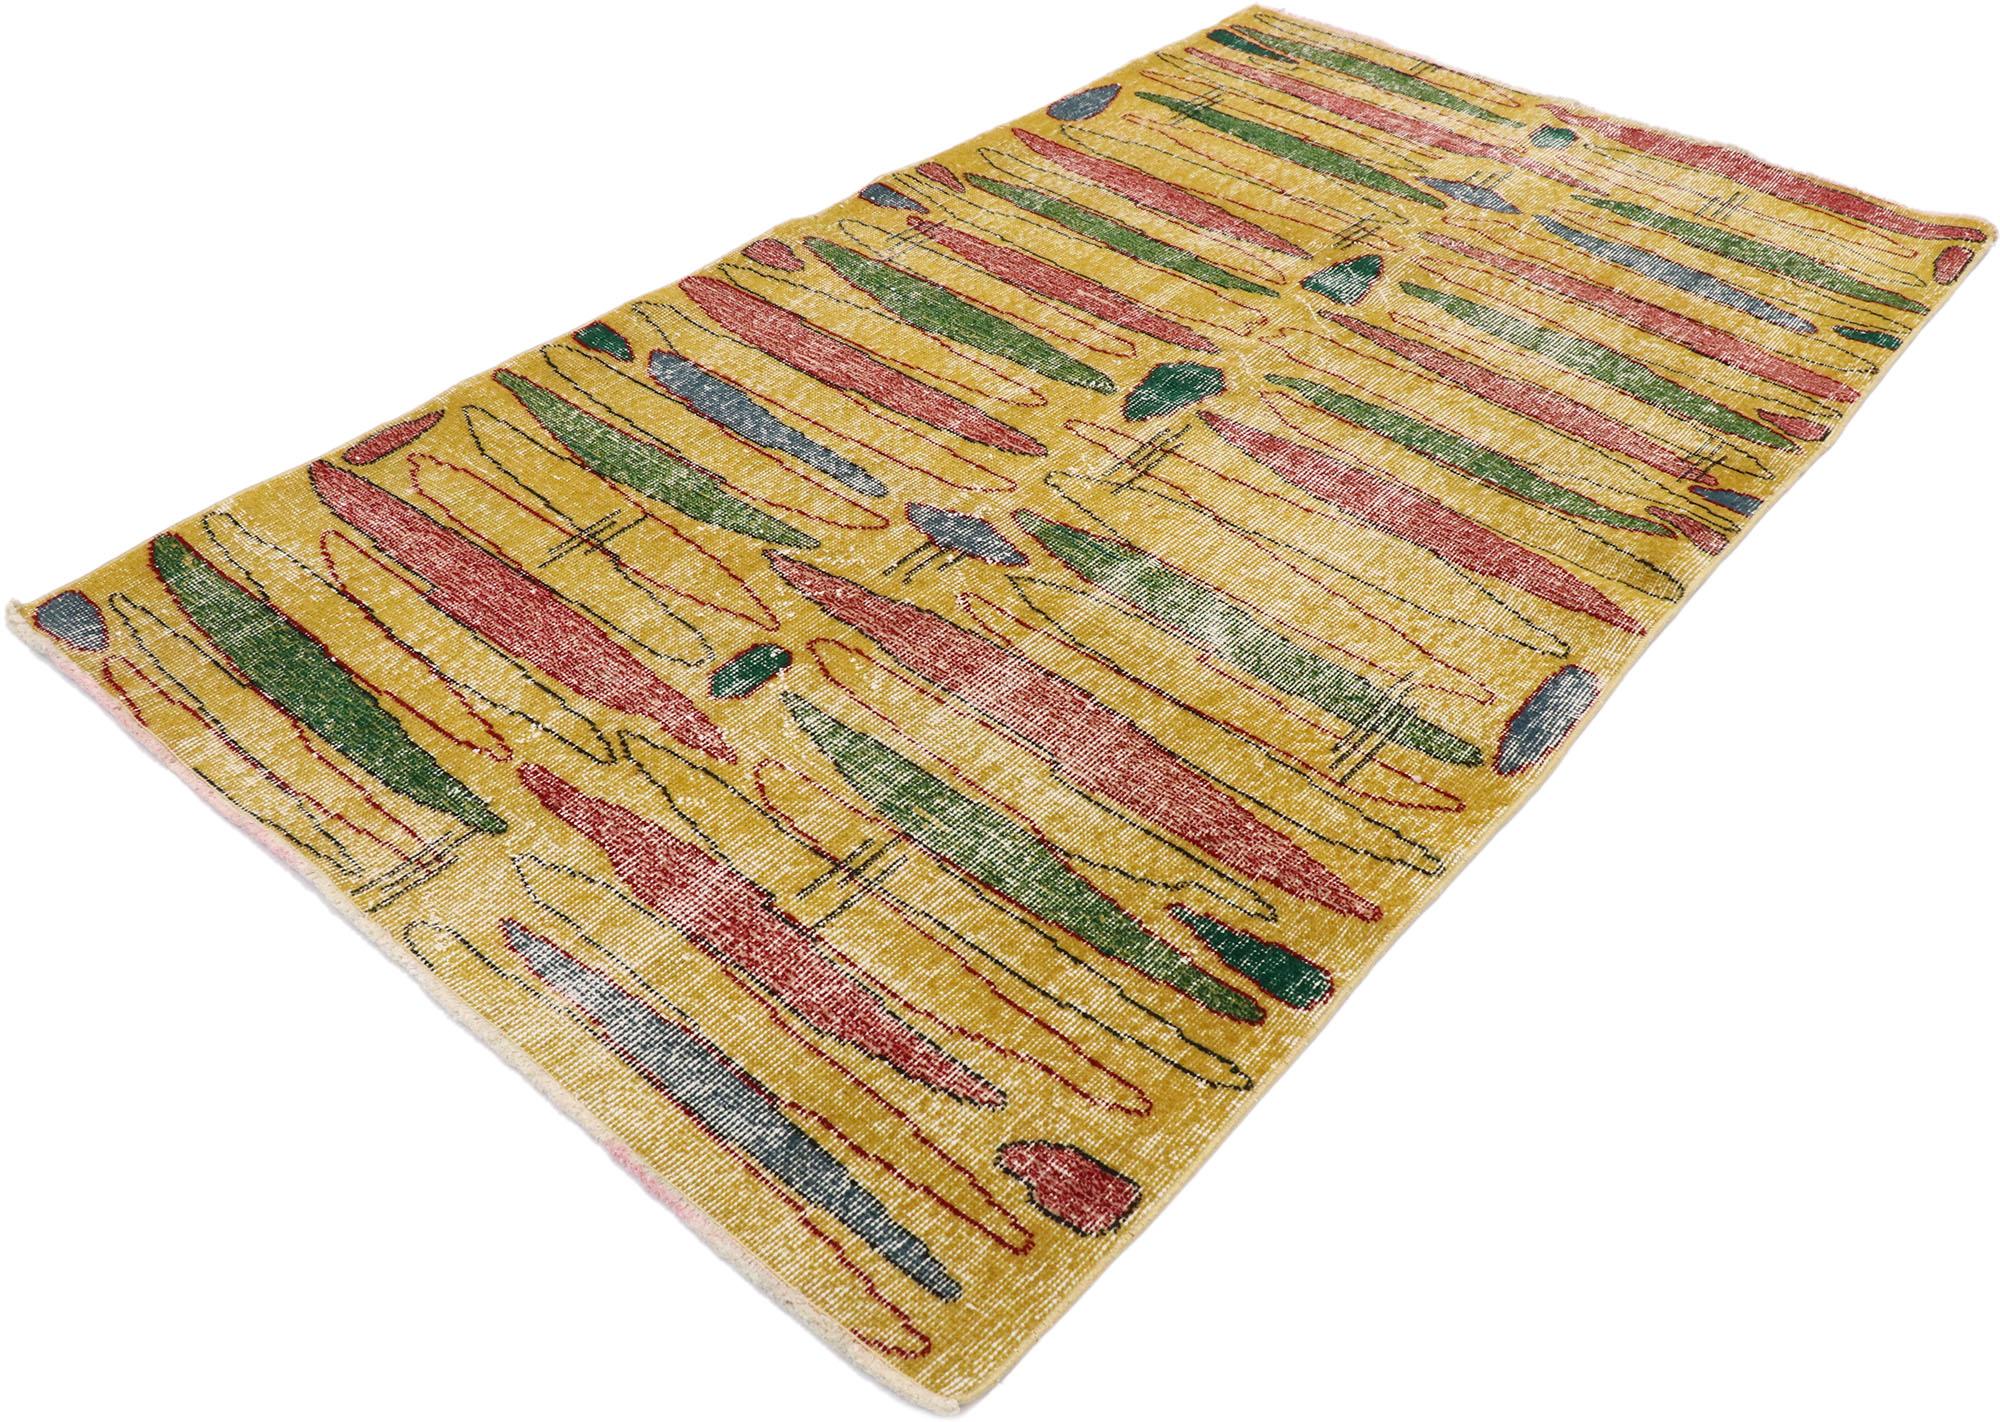 53340 Zeki Muren Distressed Vintage Turkish Sivas Rug with Abstract Expressionist Style. The bold geometric pattern and vibrant colors woven into this hand knotted wool Zeki Muren distressed vintage Turkish Sivas rug work together creating a truly